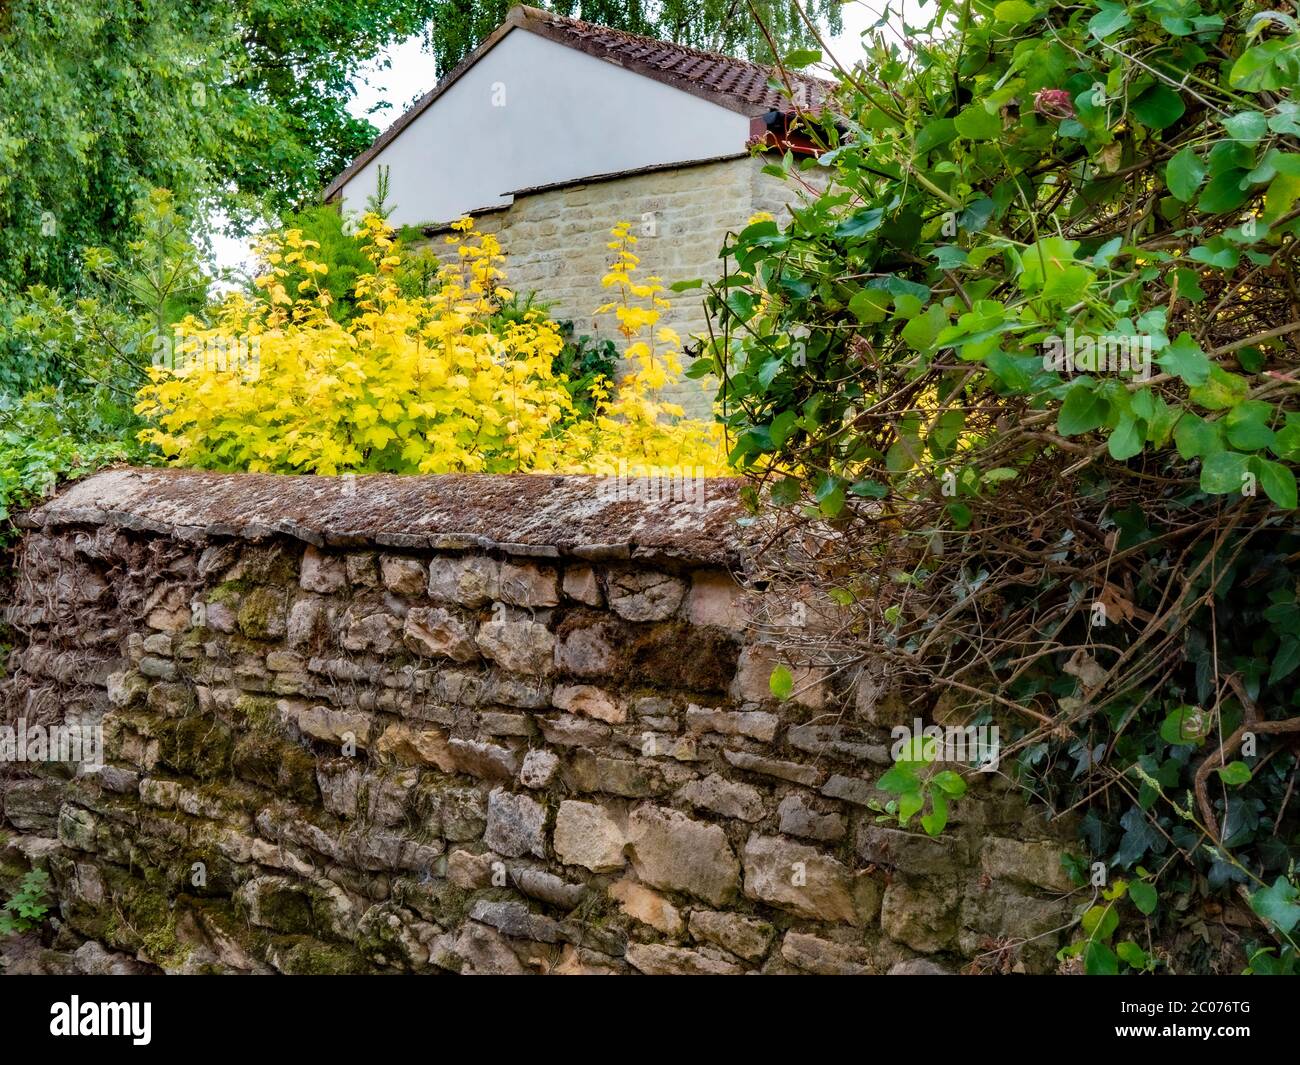 Centuries old attractive stone boundary wall, with a curved top, in front of a restored stone barn in Lincolnshire, England, UK. Stock Photo